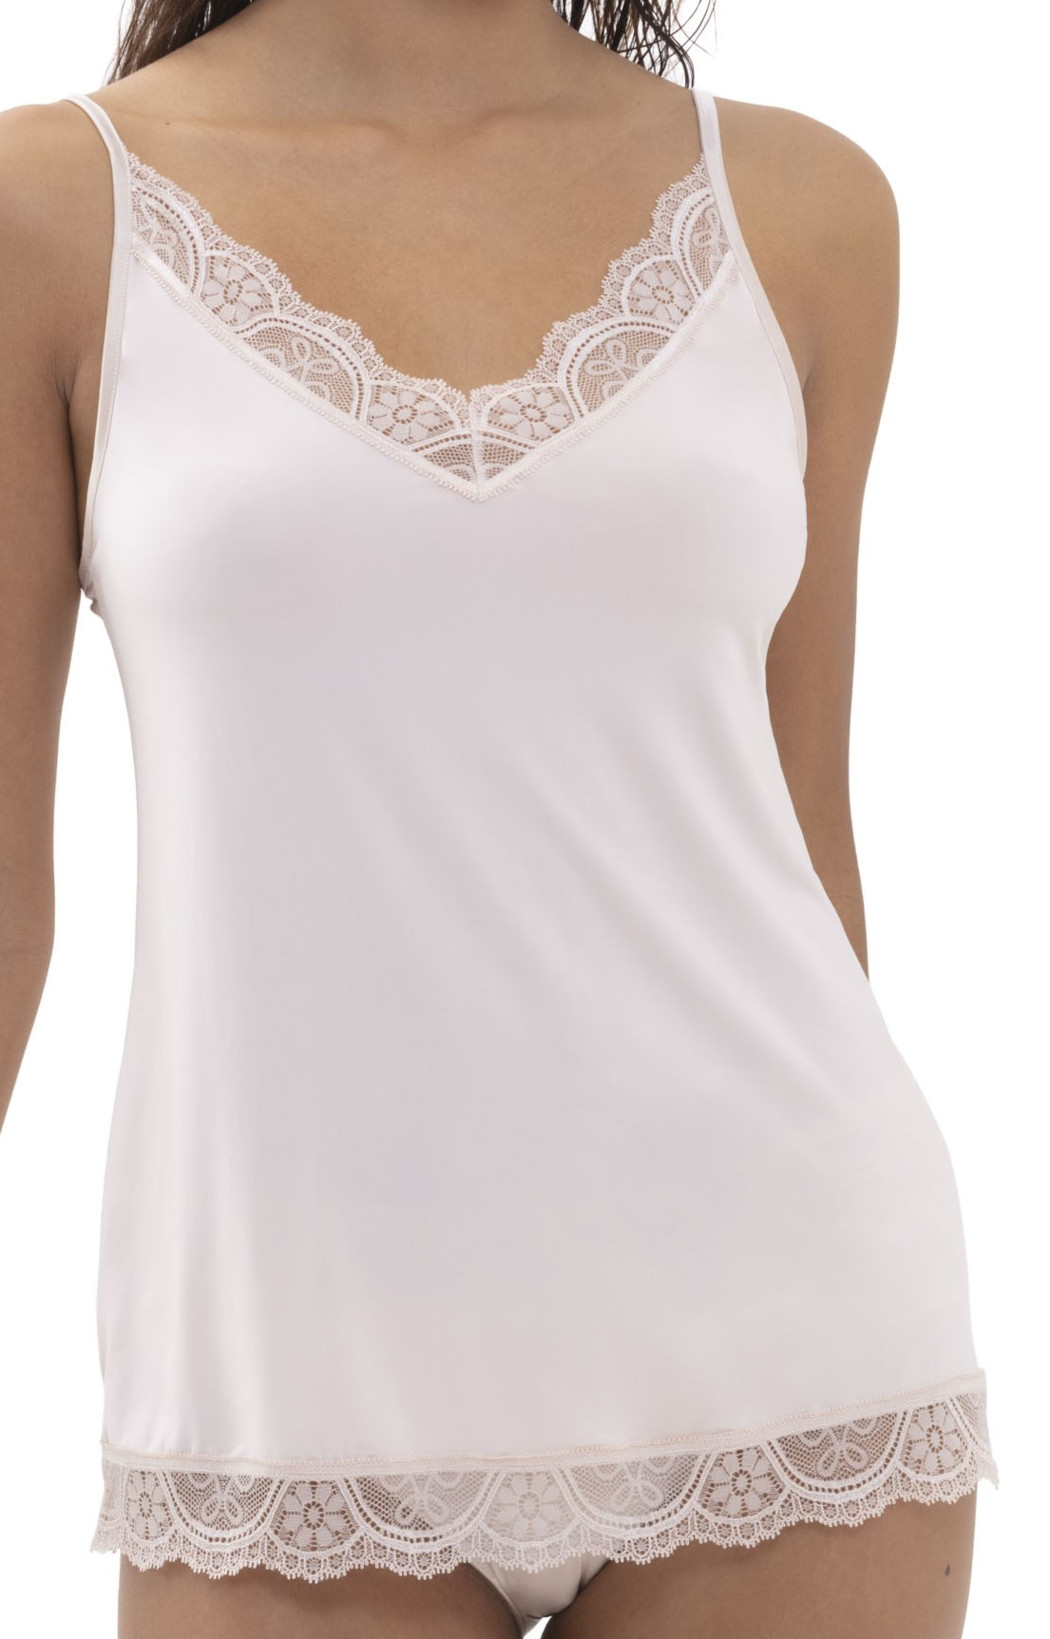 Mey Serie Poetry Fame Damen Camisole